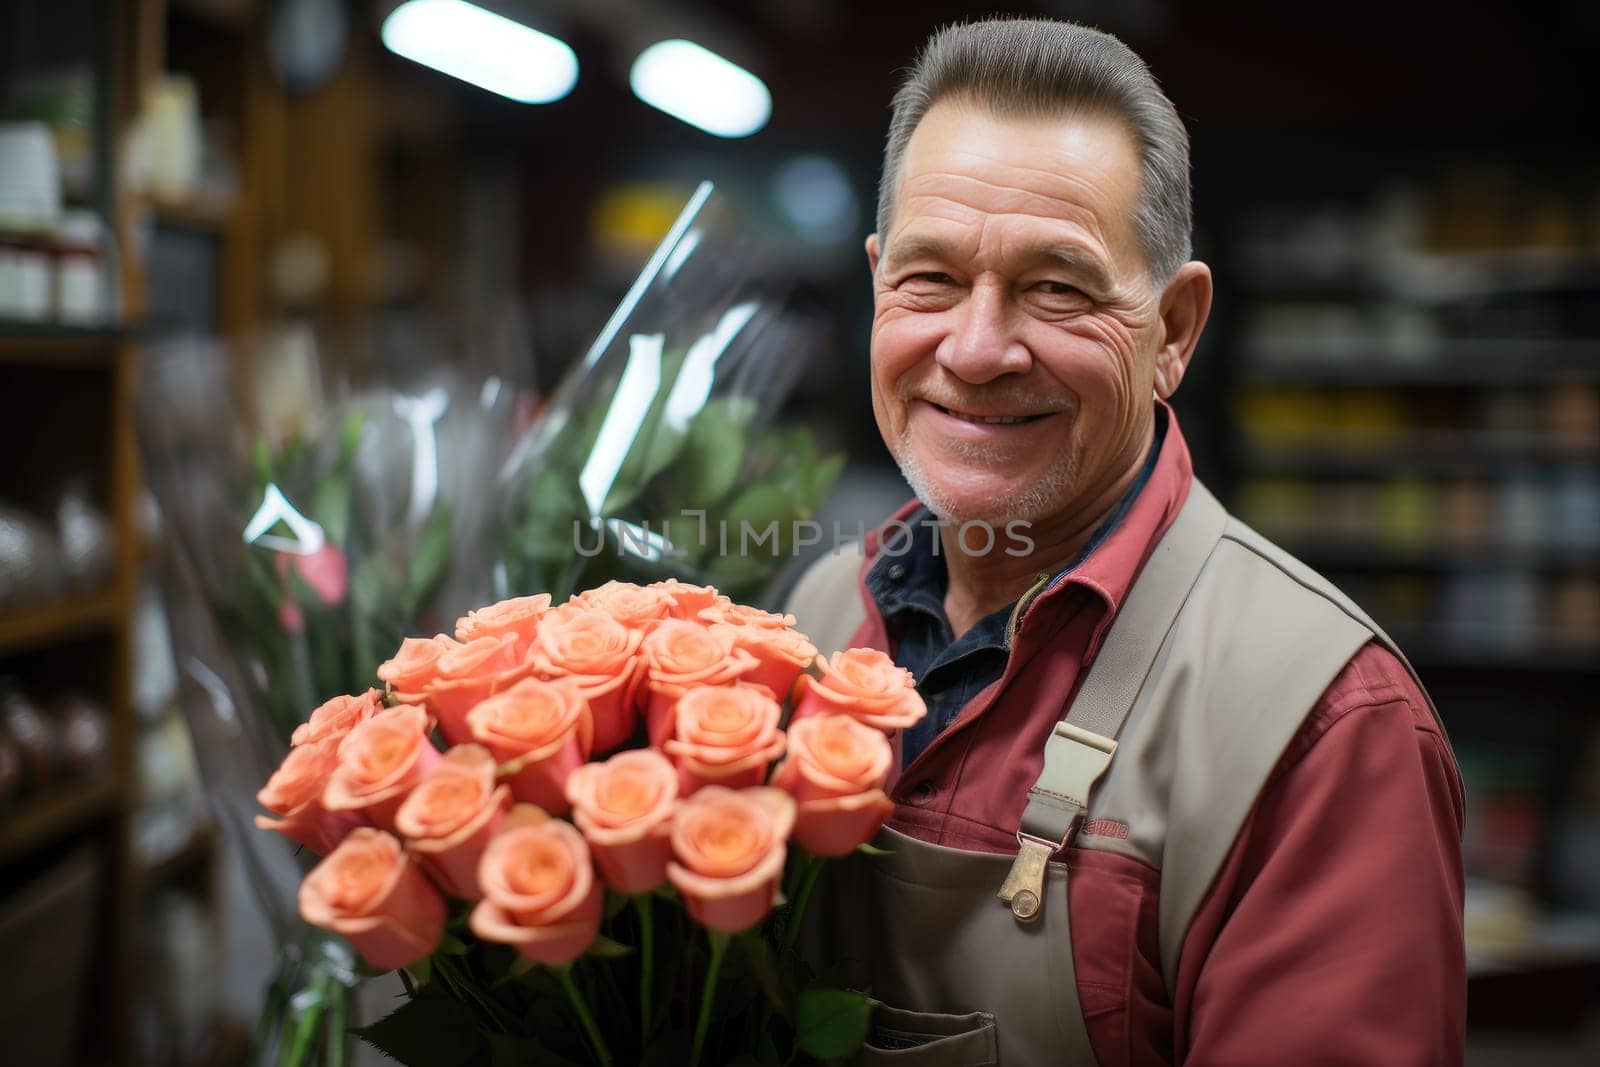 A delightful portrait of a man with a bouquet of pink roses is perfect for Valentine's Day. The man smiles and radiates joy, creating a touching image.